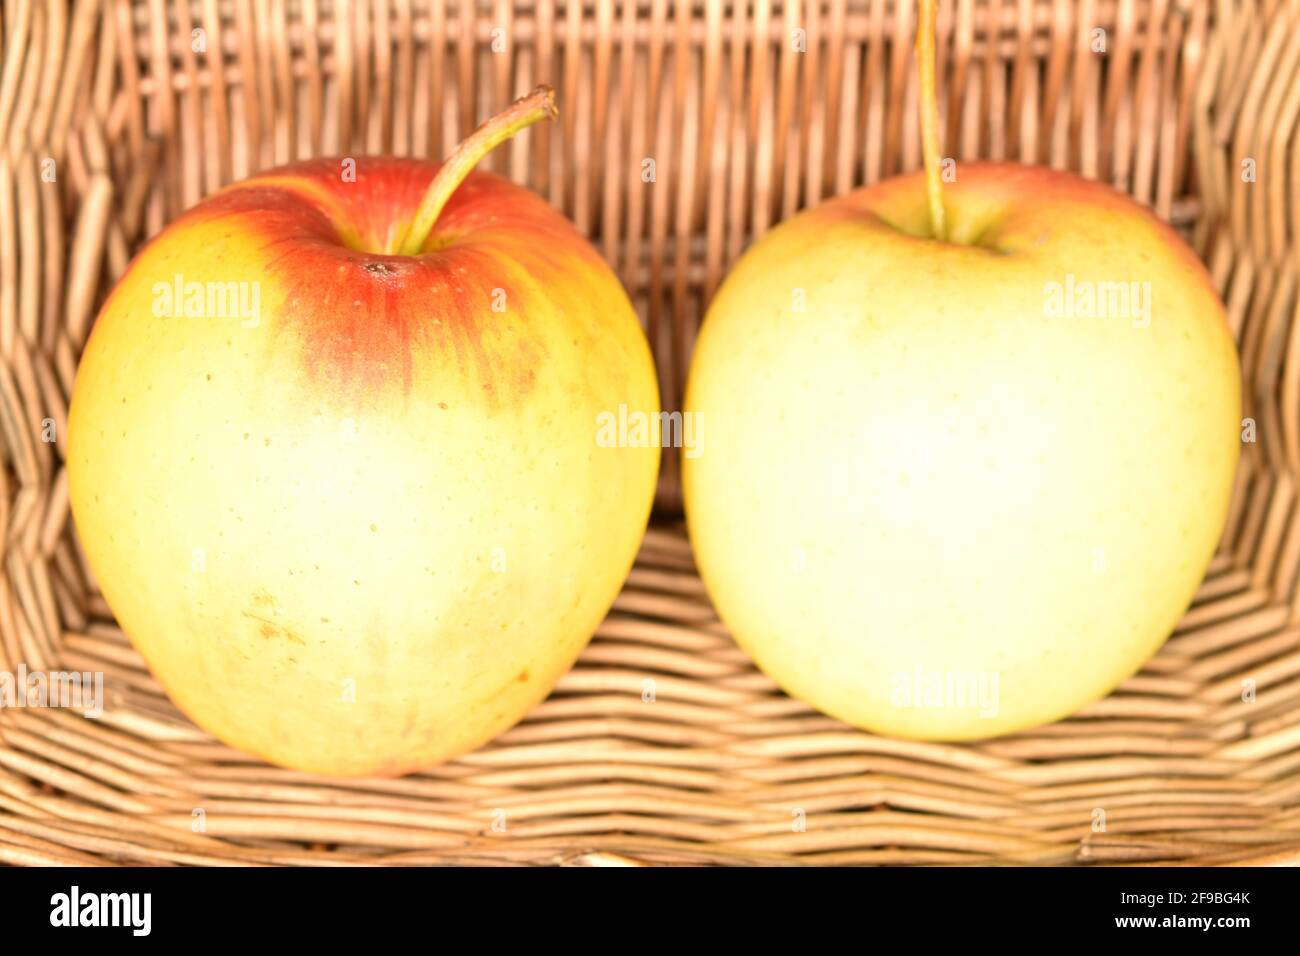 Two ripe organic, juicy, aromatic apples in a wicker basket of vines, close-up. Stock Photo